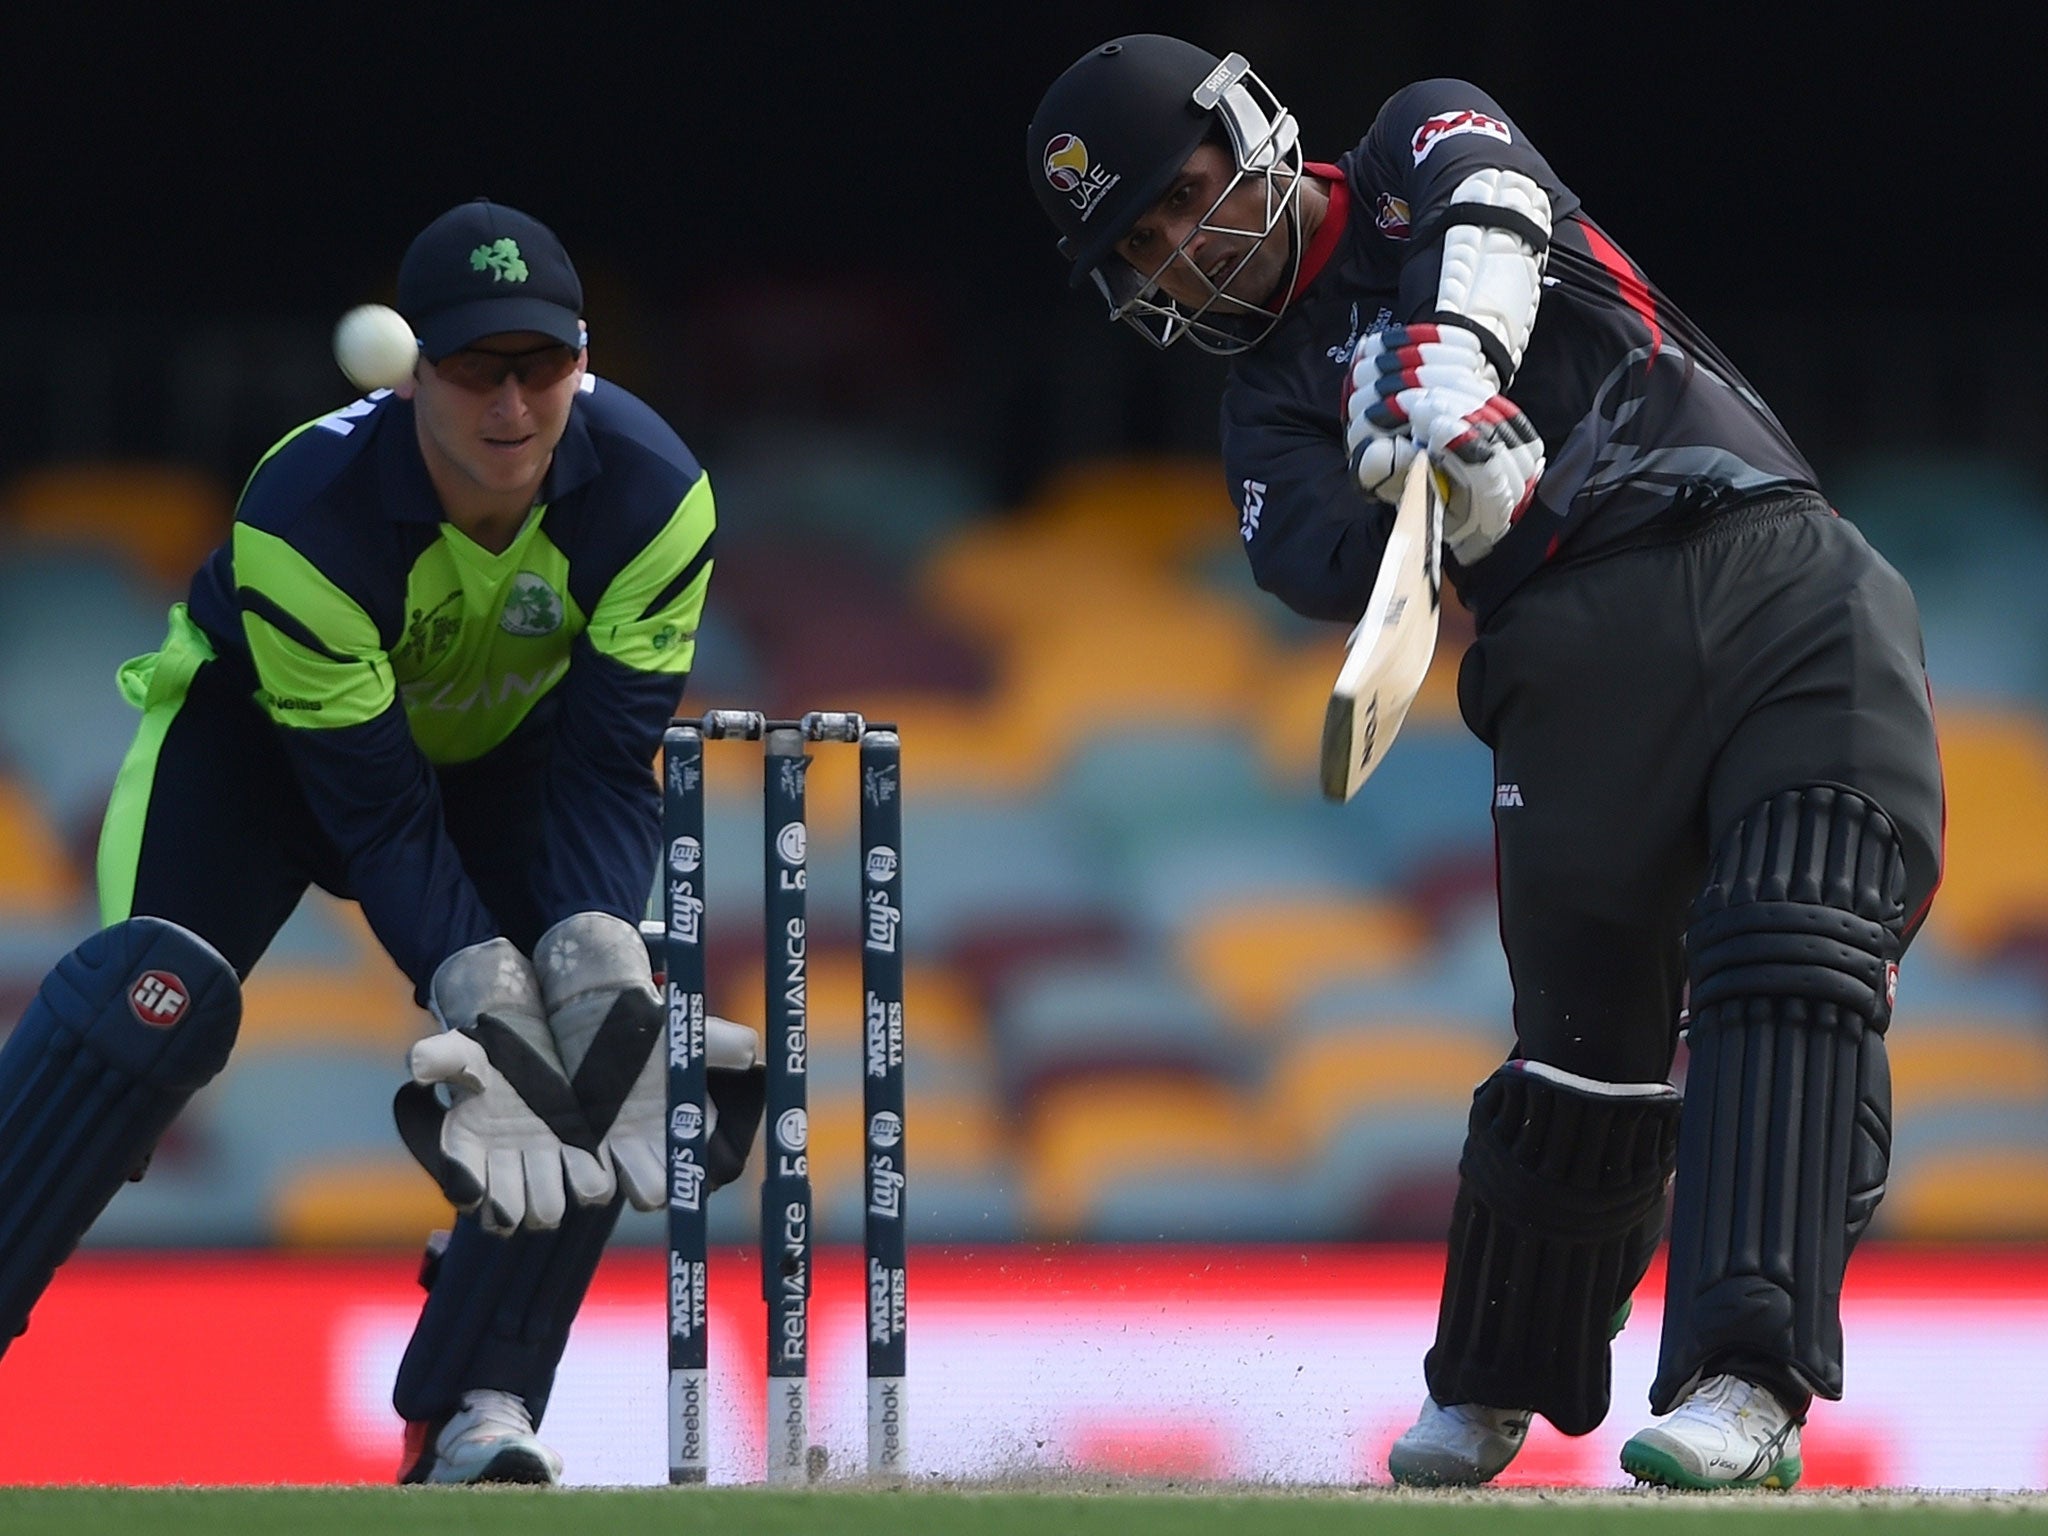 The UAE took their clash with Ireland to the final over before succumbing to a two-wicket defeat